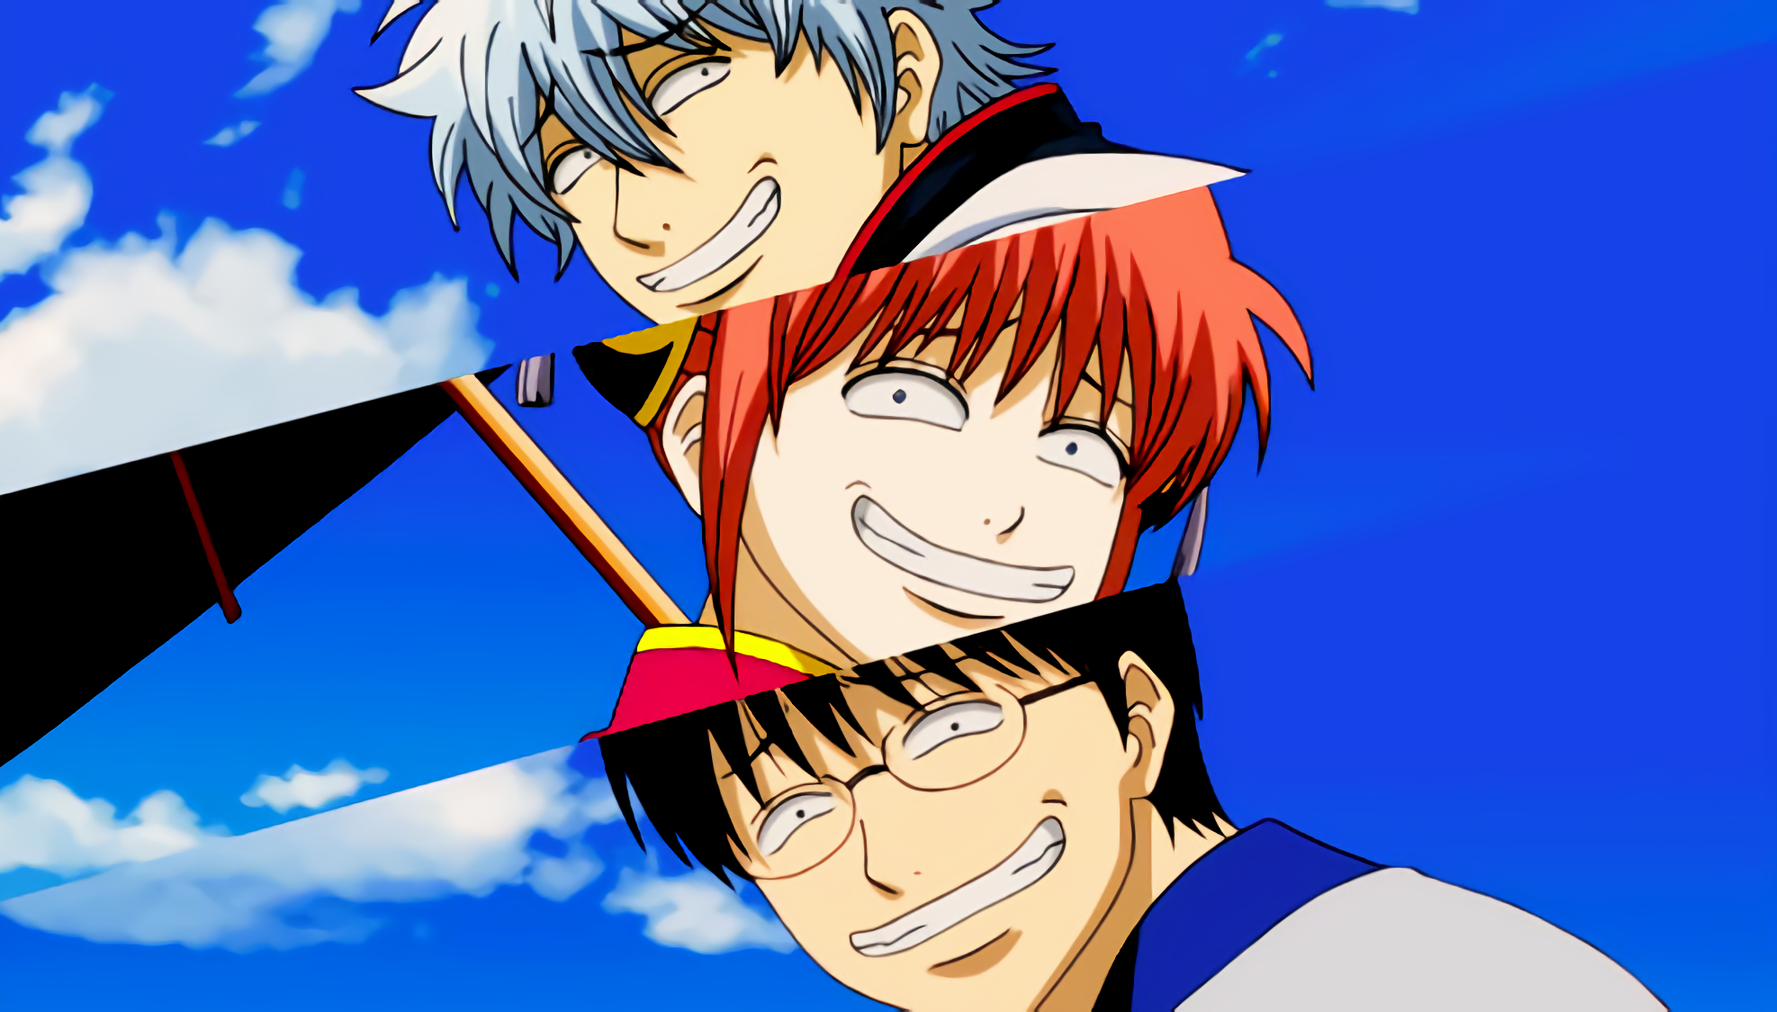 520 Anime Gintama HD Wallpapers and Backgrounds